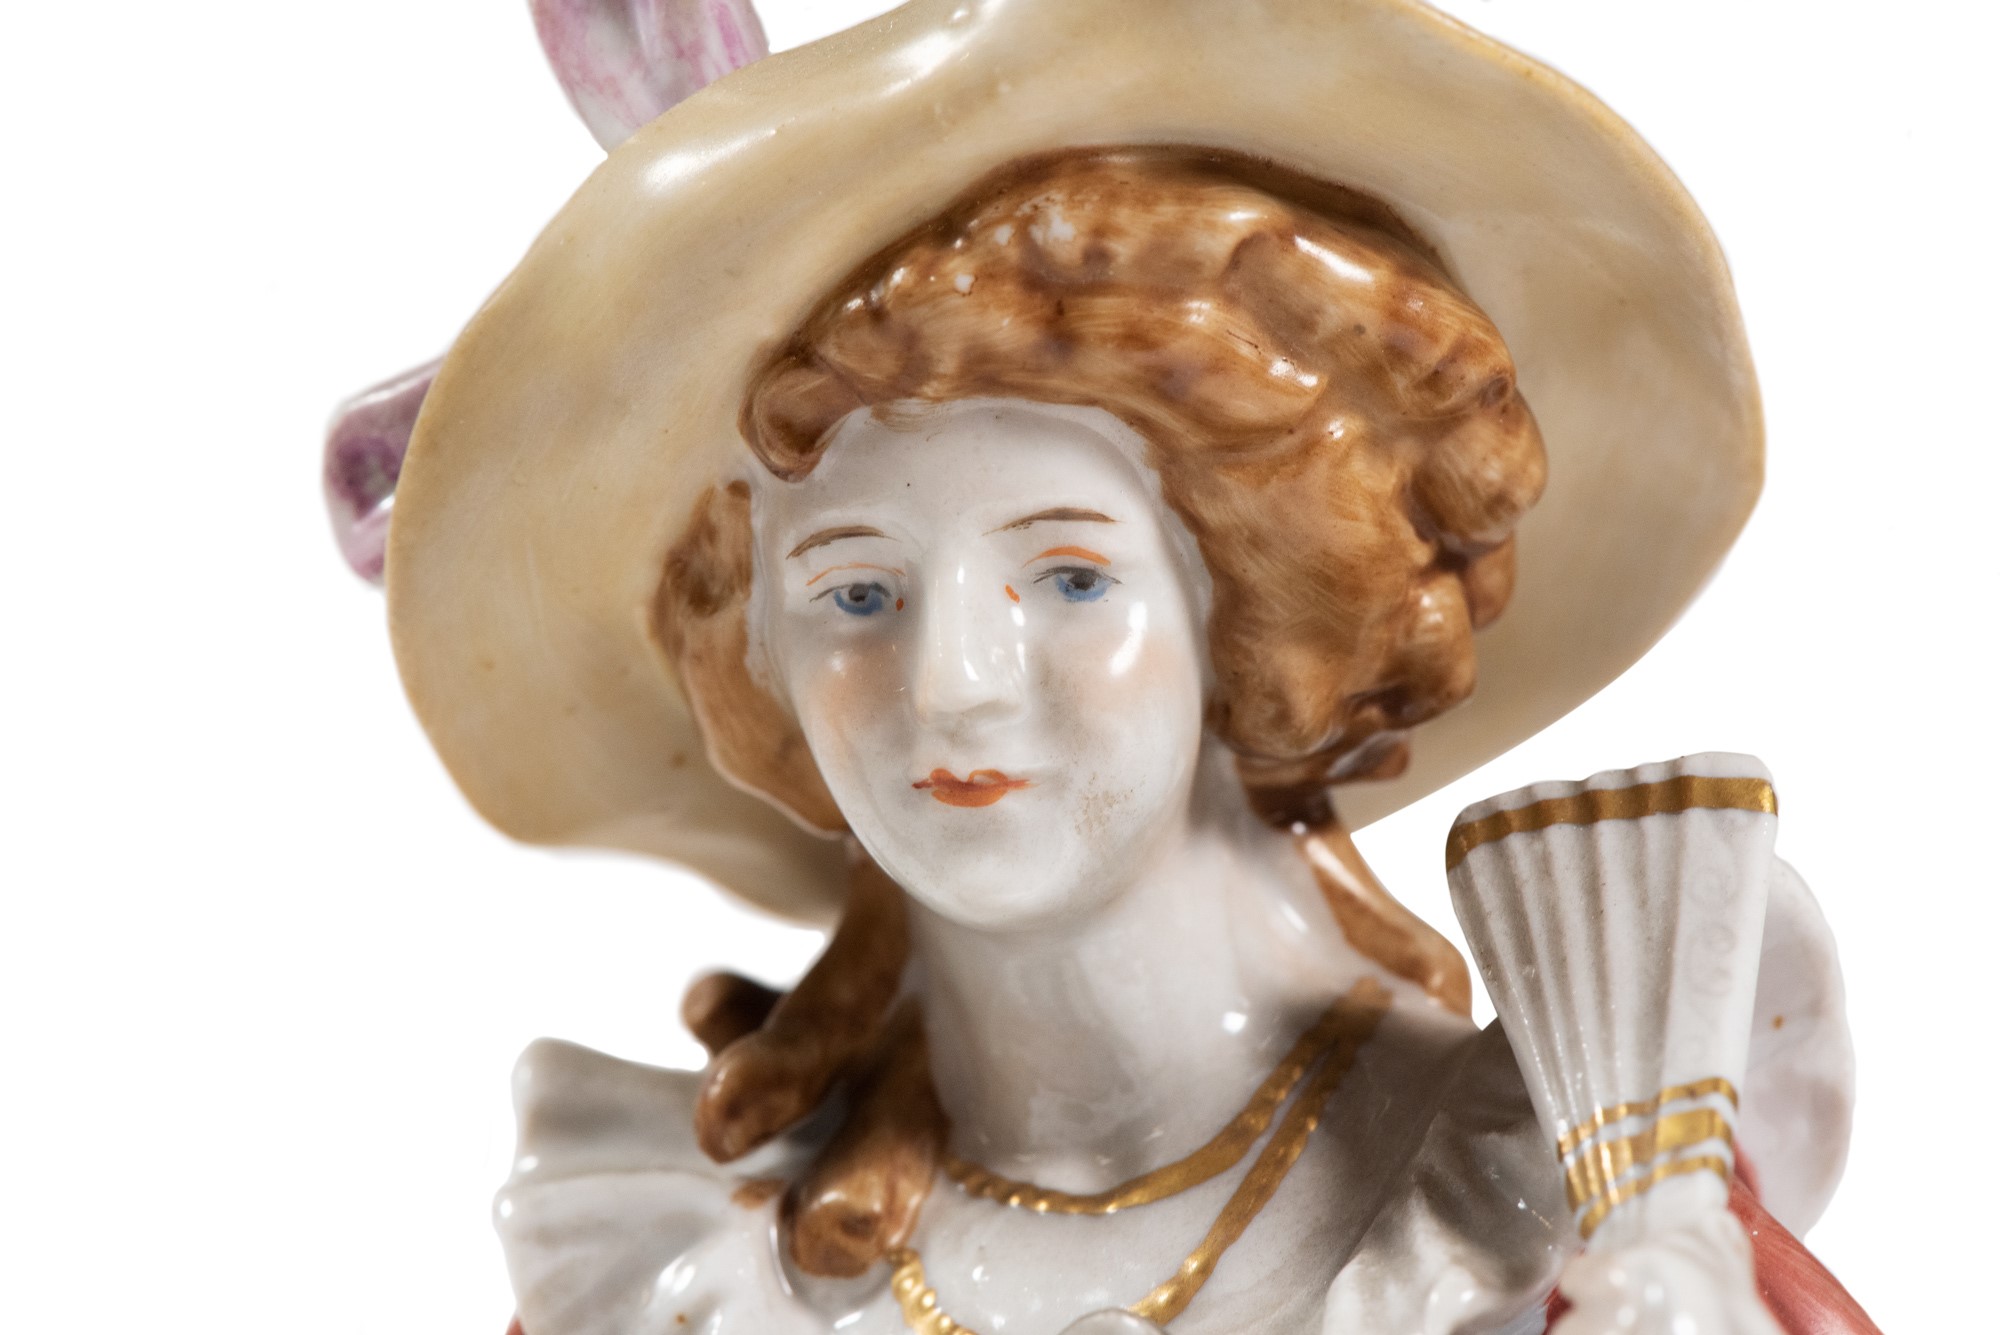 Pair of white and polychrome porcelain sculptures Italian manufacture, mid 20th centurymarked N - Image 4 of 6